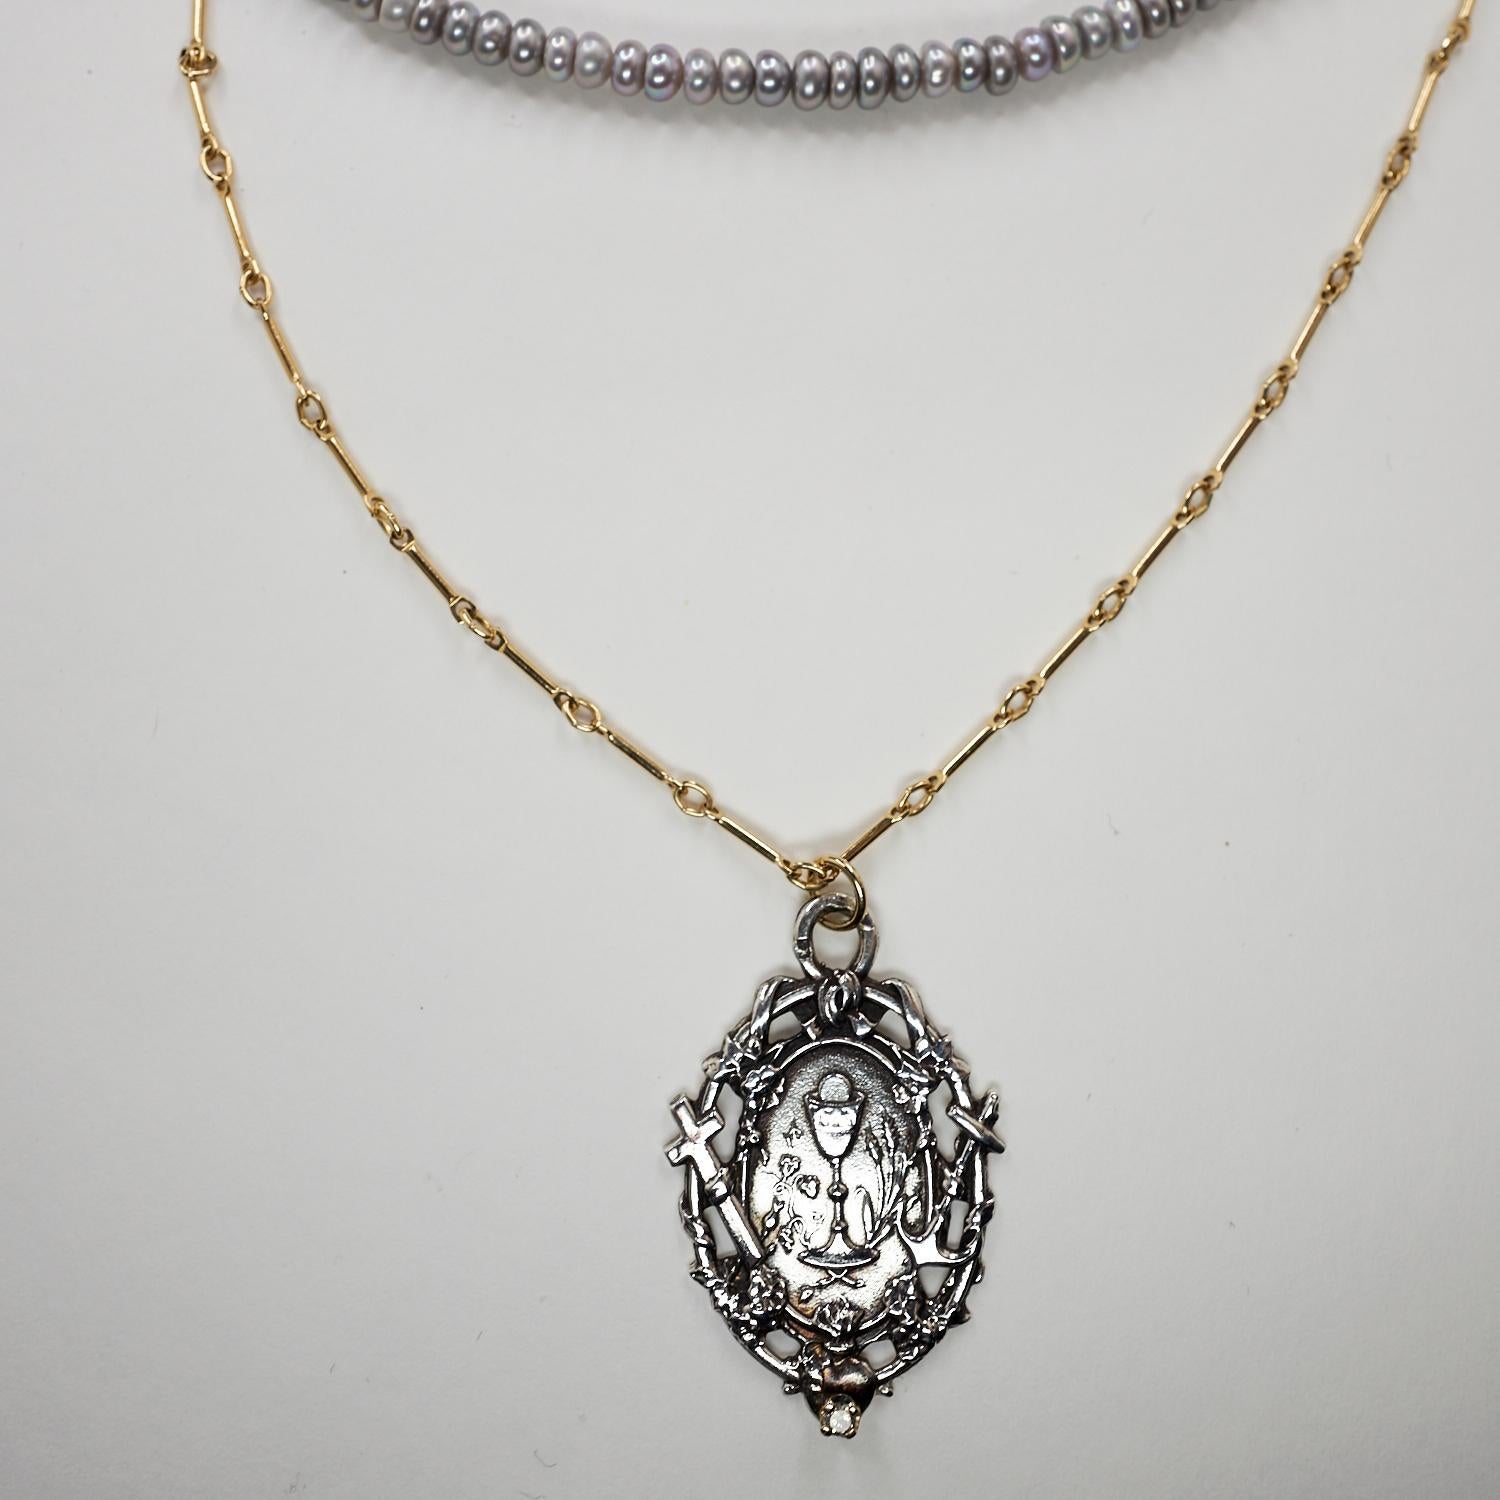 Unique White Diamond Set in Gold Prong Silver Grey Pearl Turquoise Bead Choker Long Gold Filled Chain  Necklace with Medal Pendant in Silver Faith Hope Love J Dauphin, One of a kind,  16